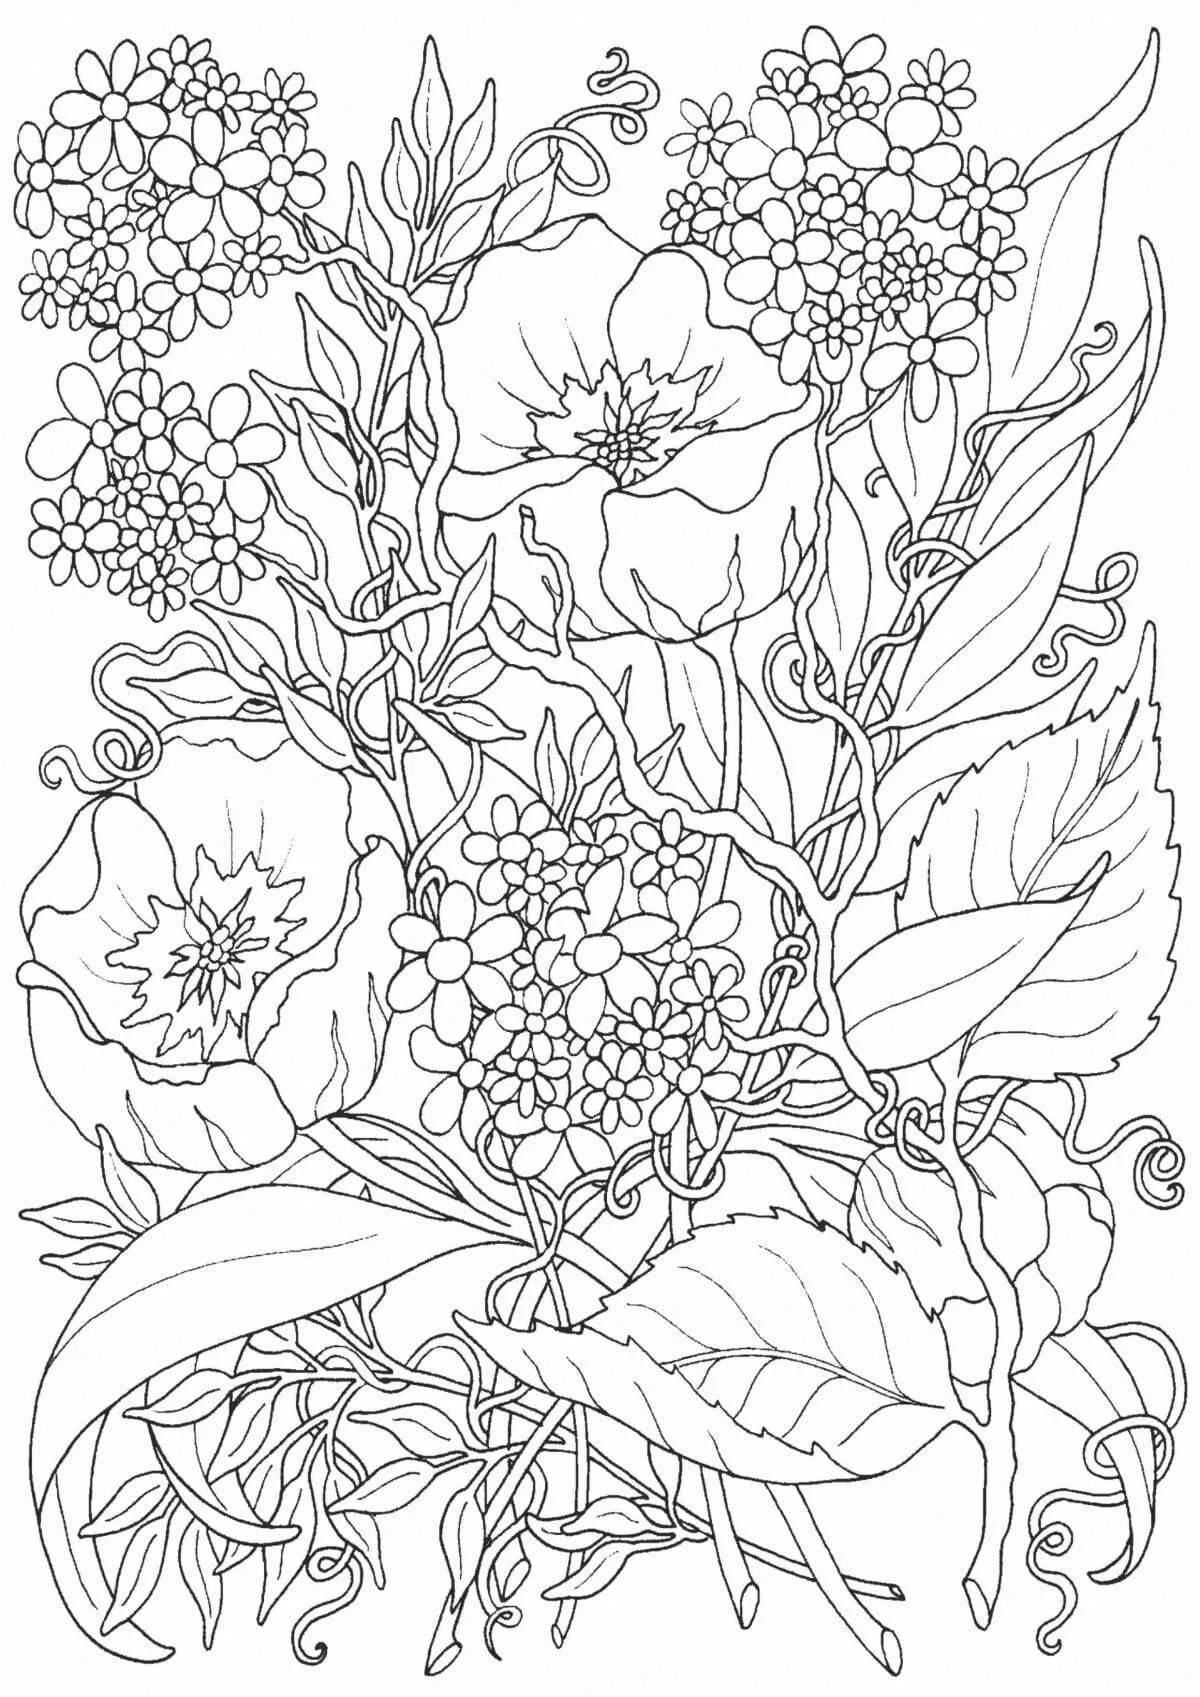 Glitter coloring pages for adults